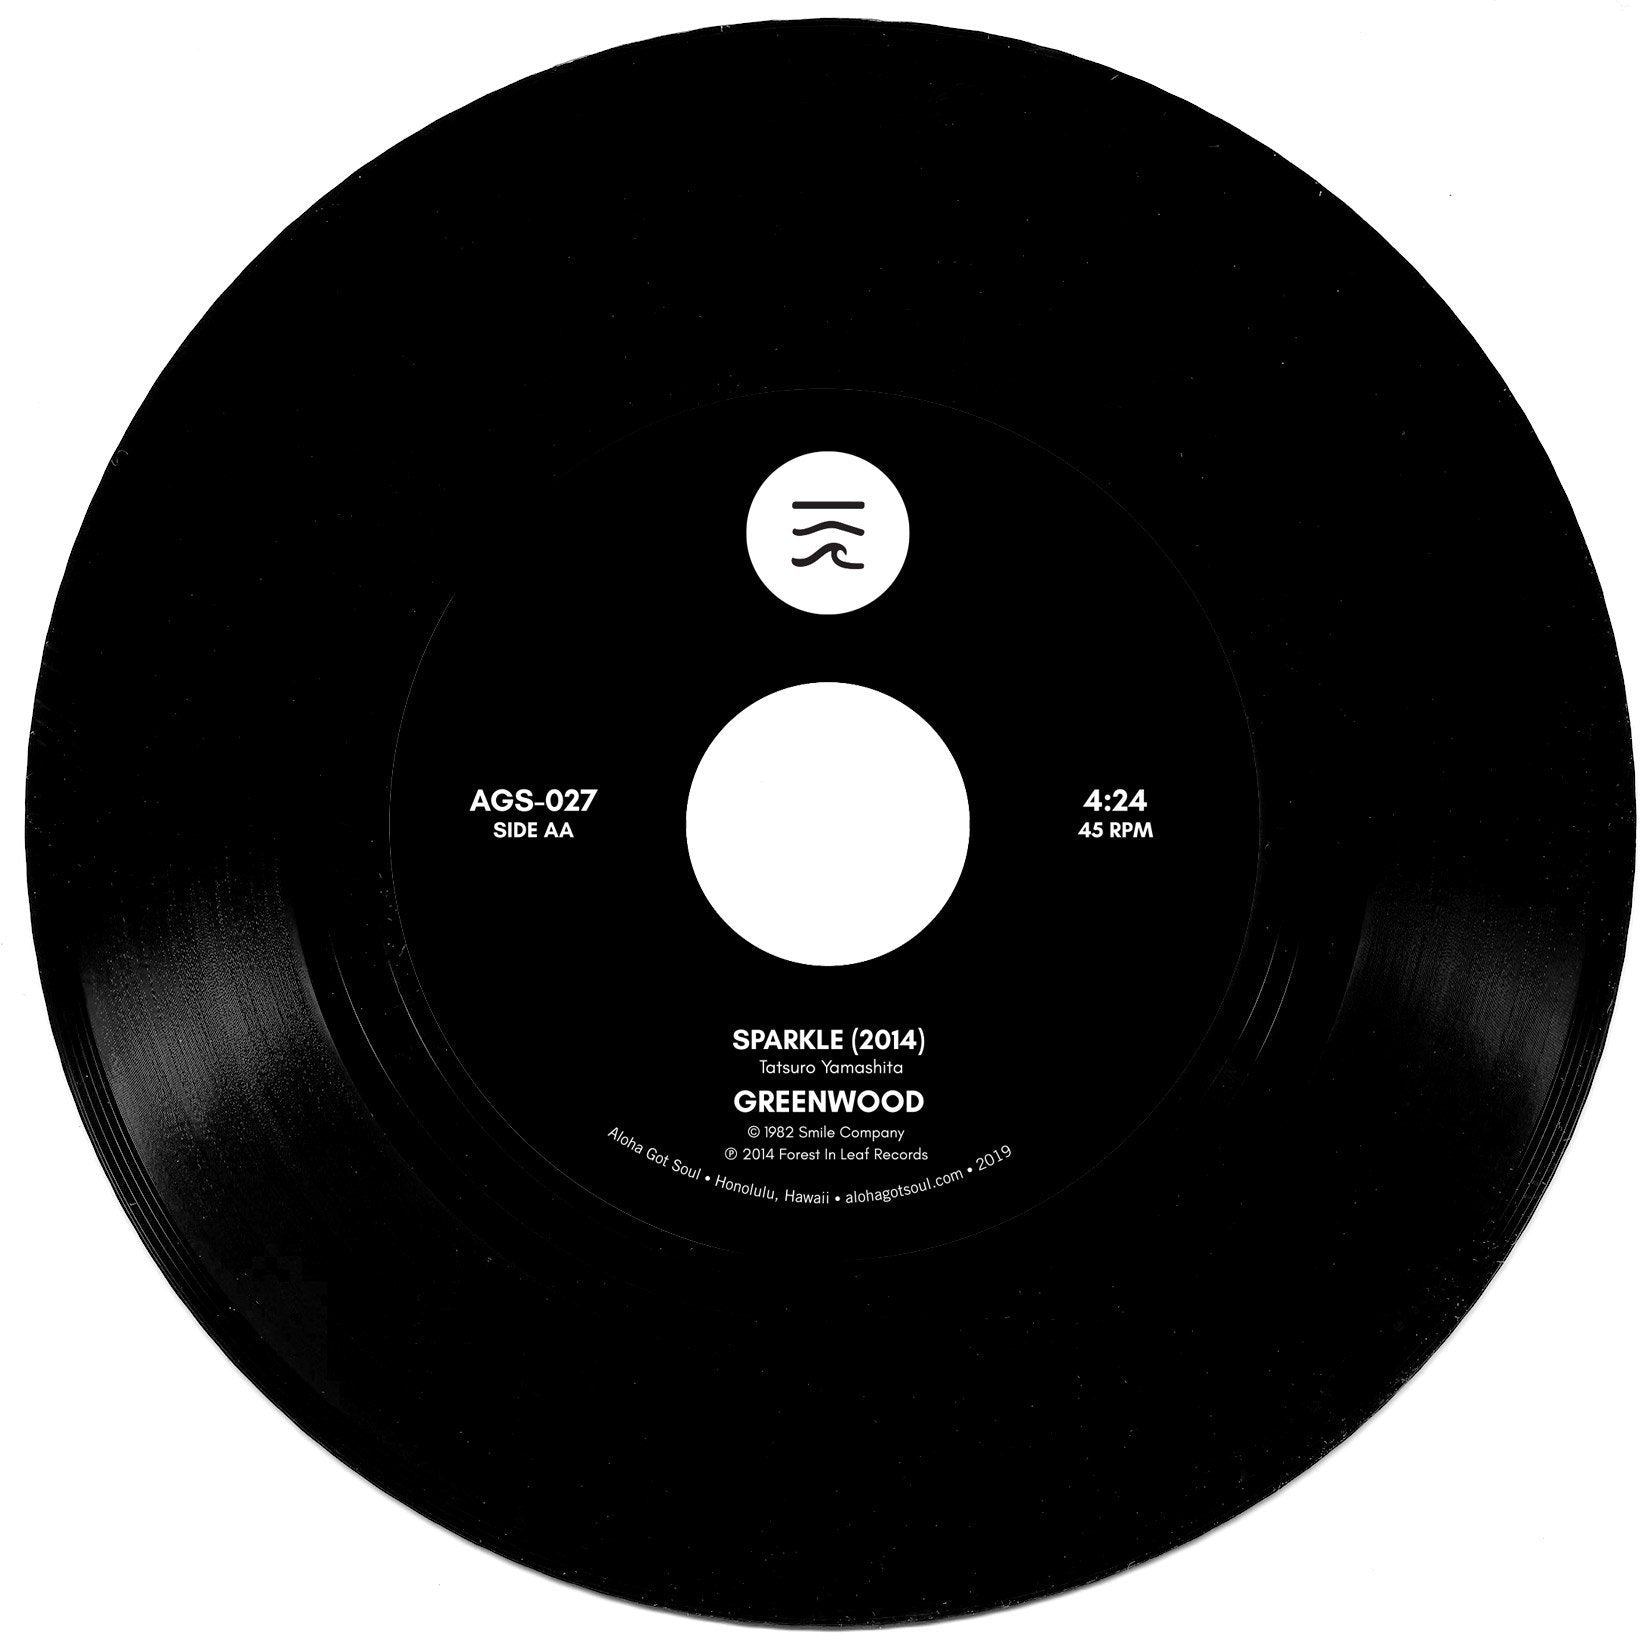 Greenwood - Sparkle (AGS-027) [repress]